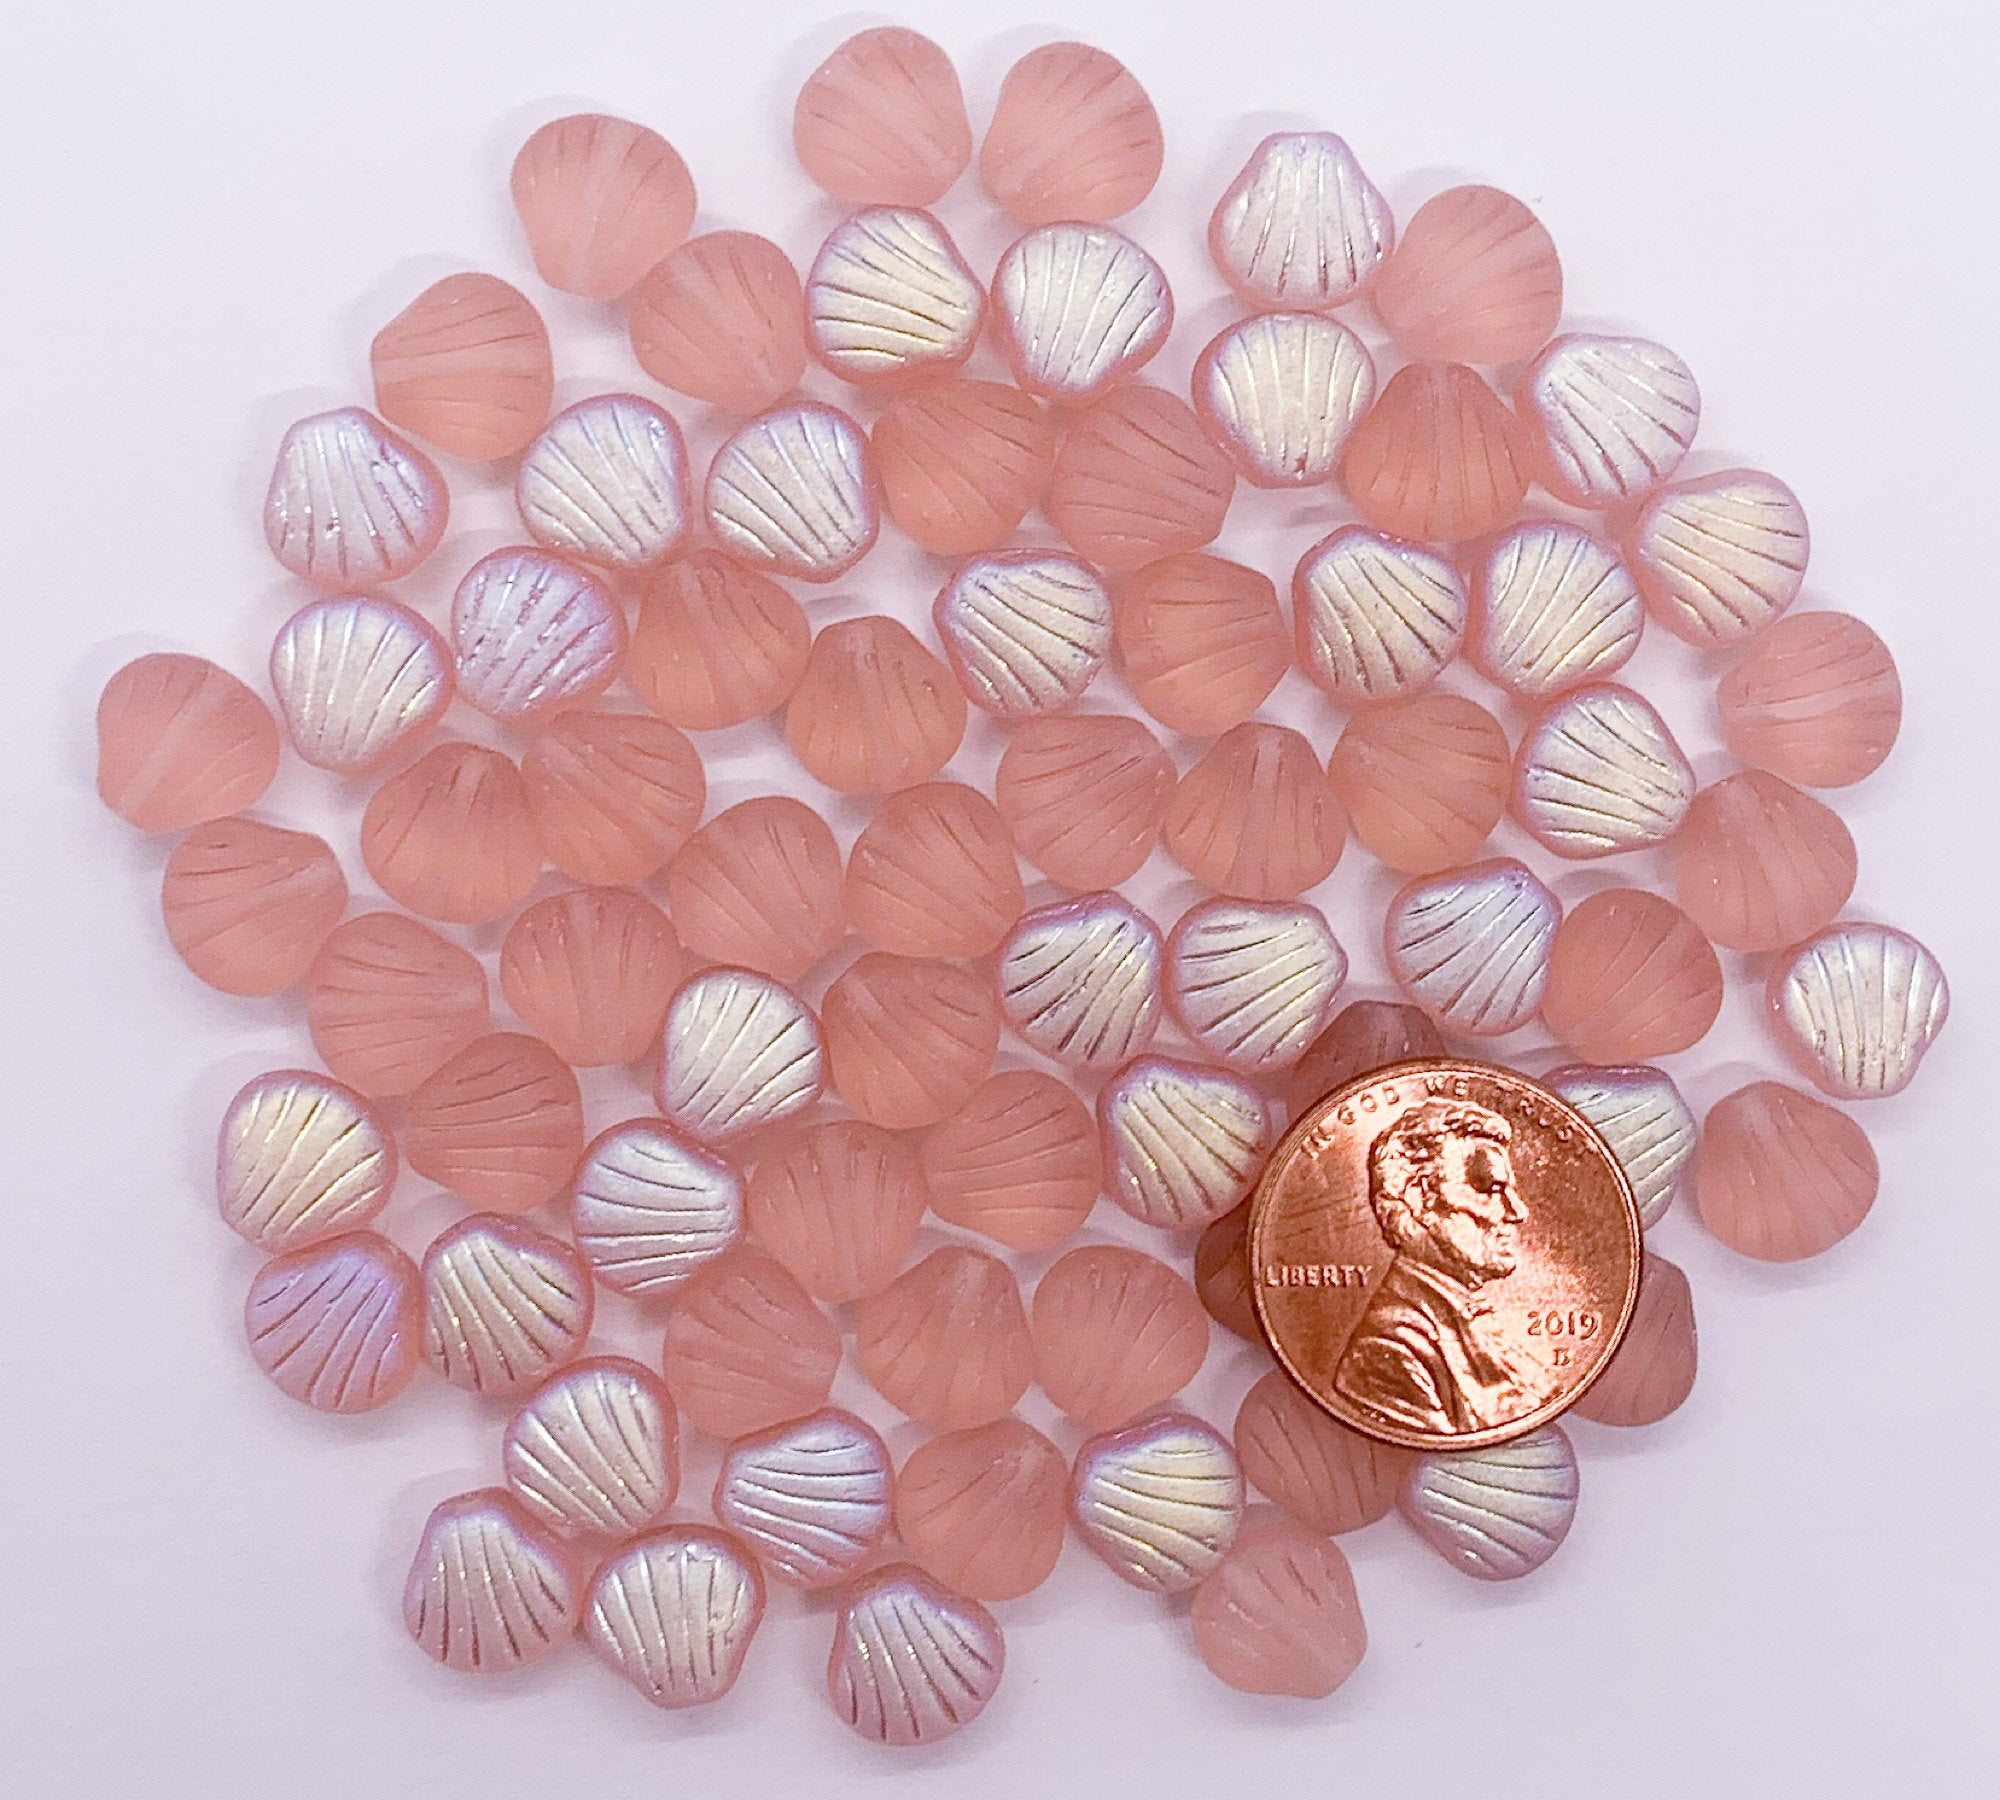 60pcs 20mm Silver Brass Wine Glass Charm Rings with 19pcs Seashell Sea  Creatures Charms Pendants, 20pcs Transparent Glass Beads and 20pcs Brass  Spacer Beads for Party Favor 